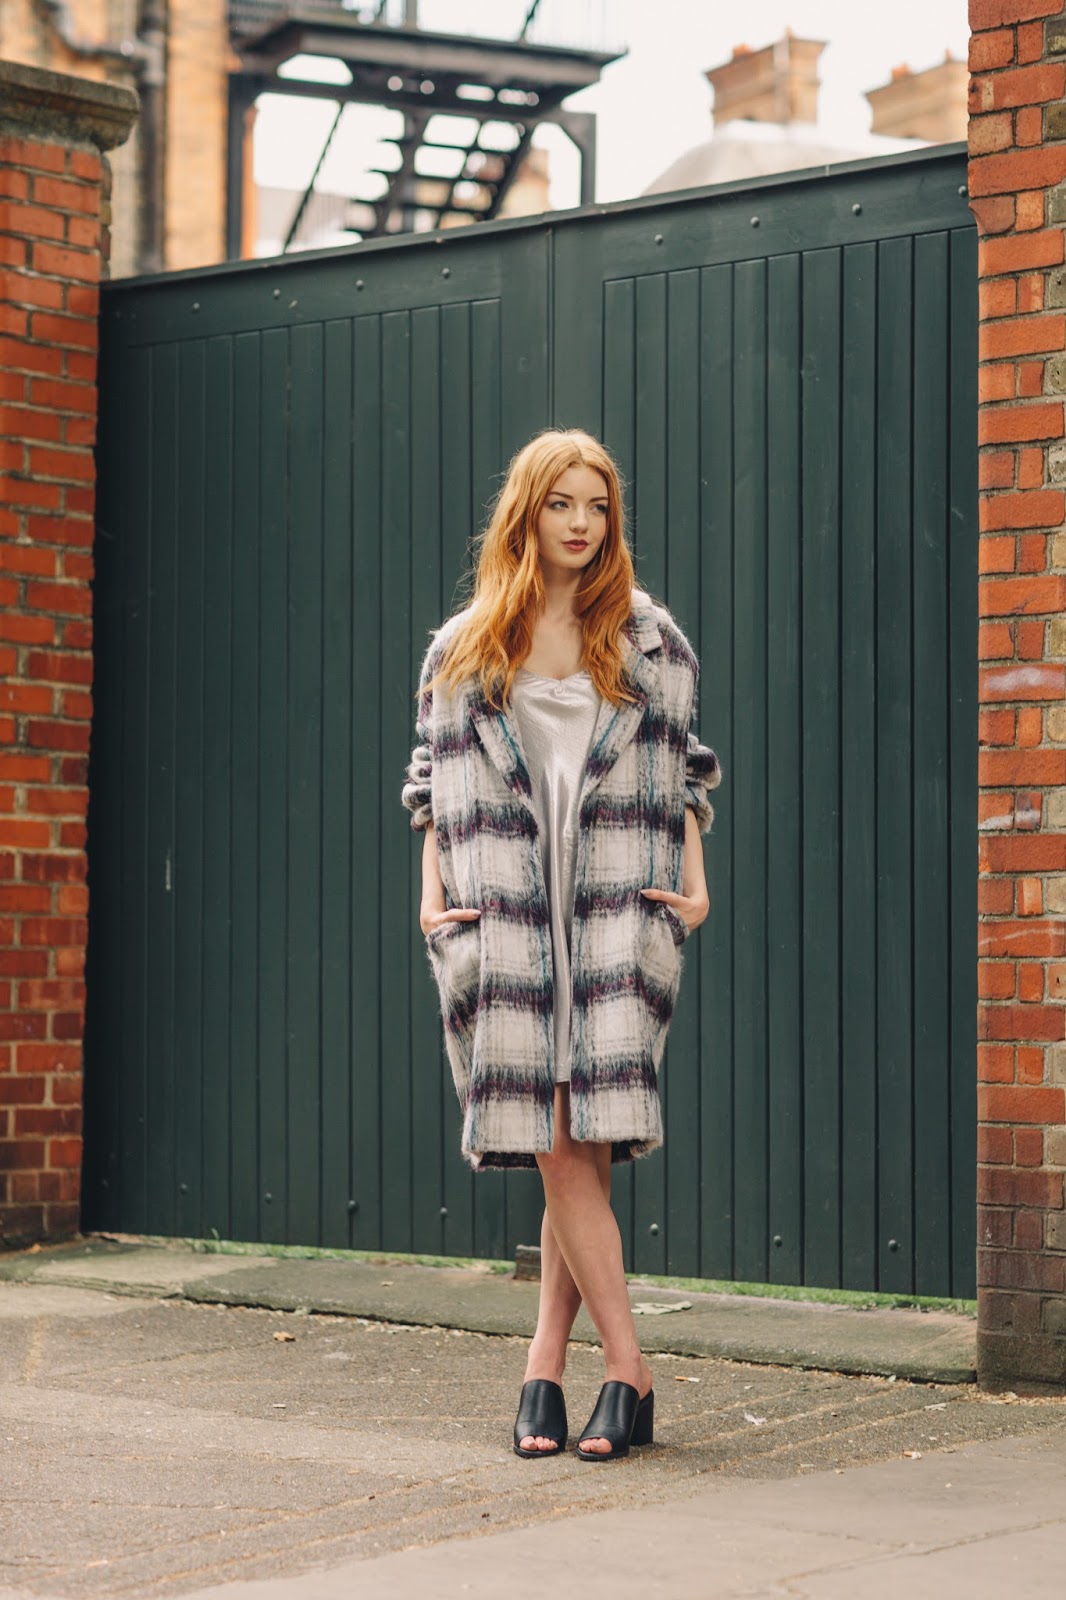 The £30 Primark houndstooth check coat celebrities and bloggers